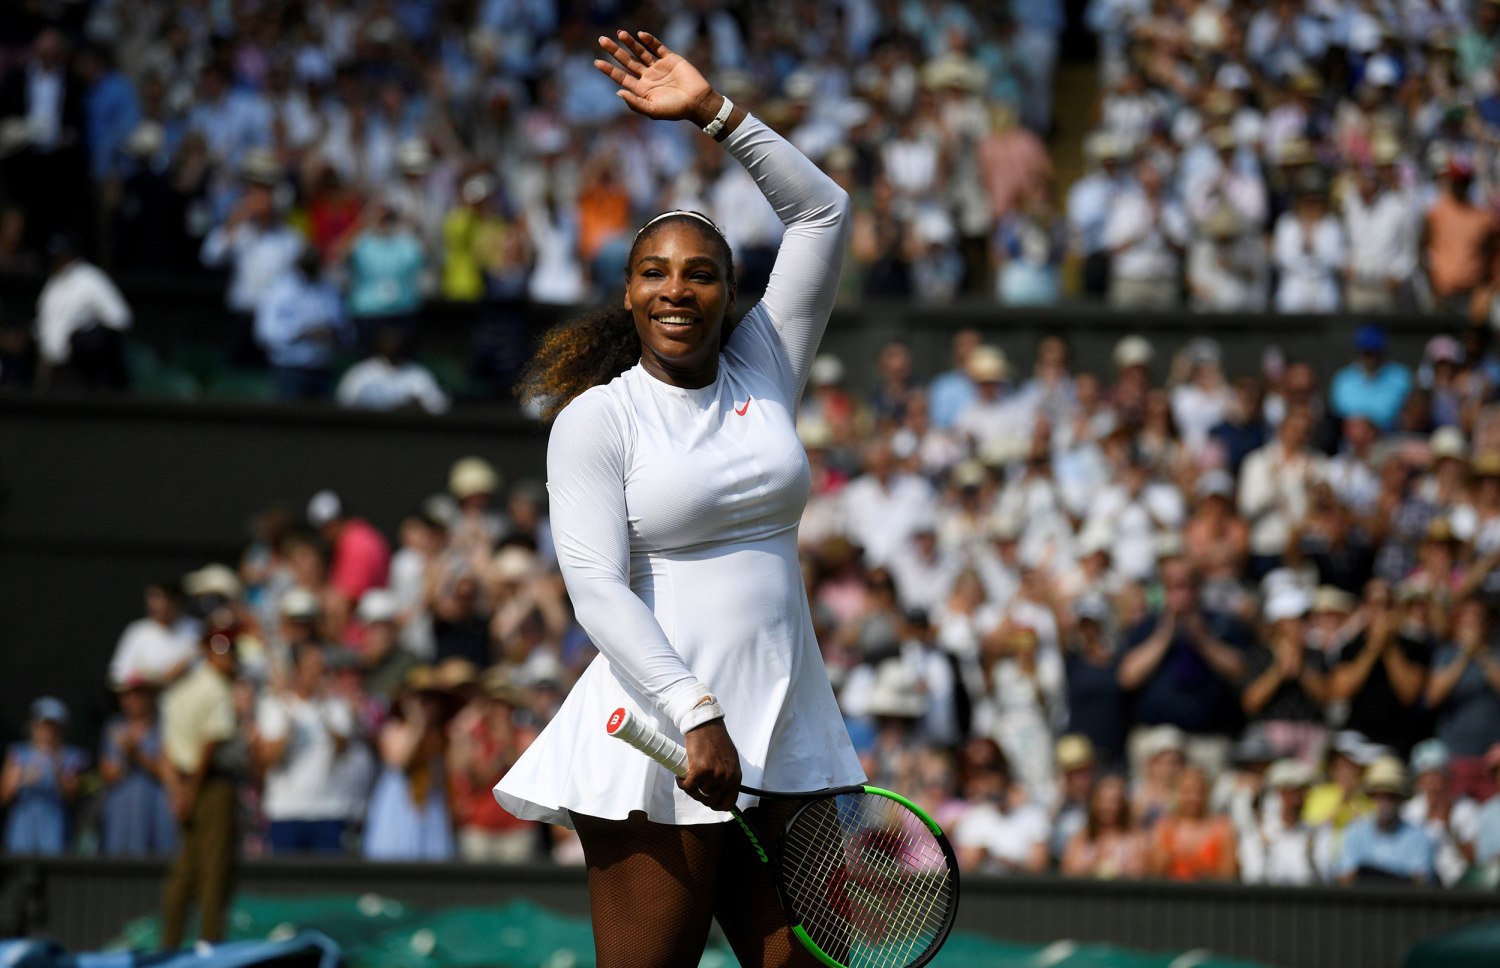 Tennis: A friendly jest between Serena Williams who teases Kim